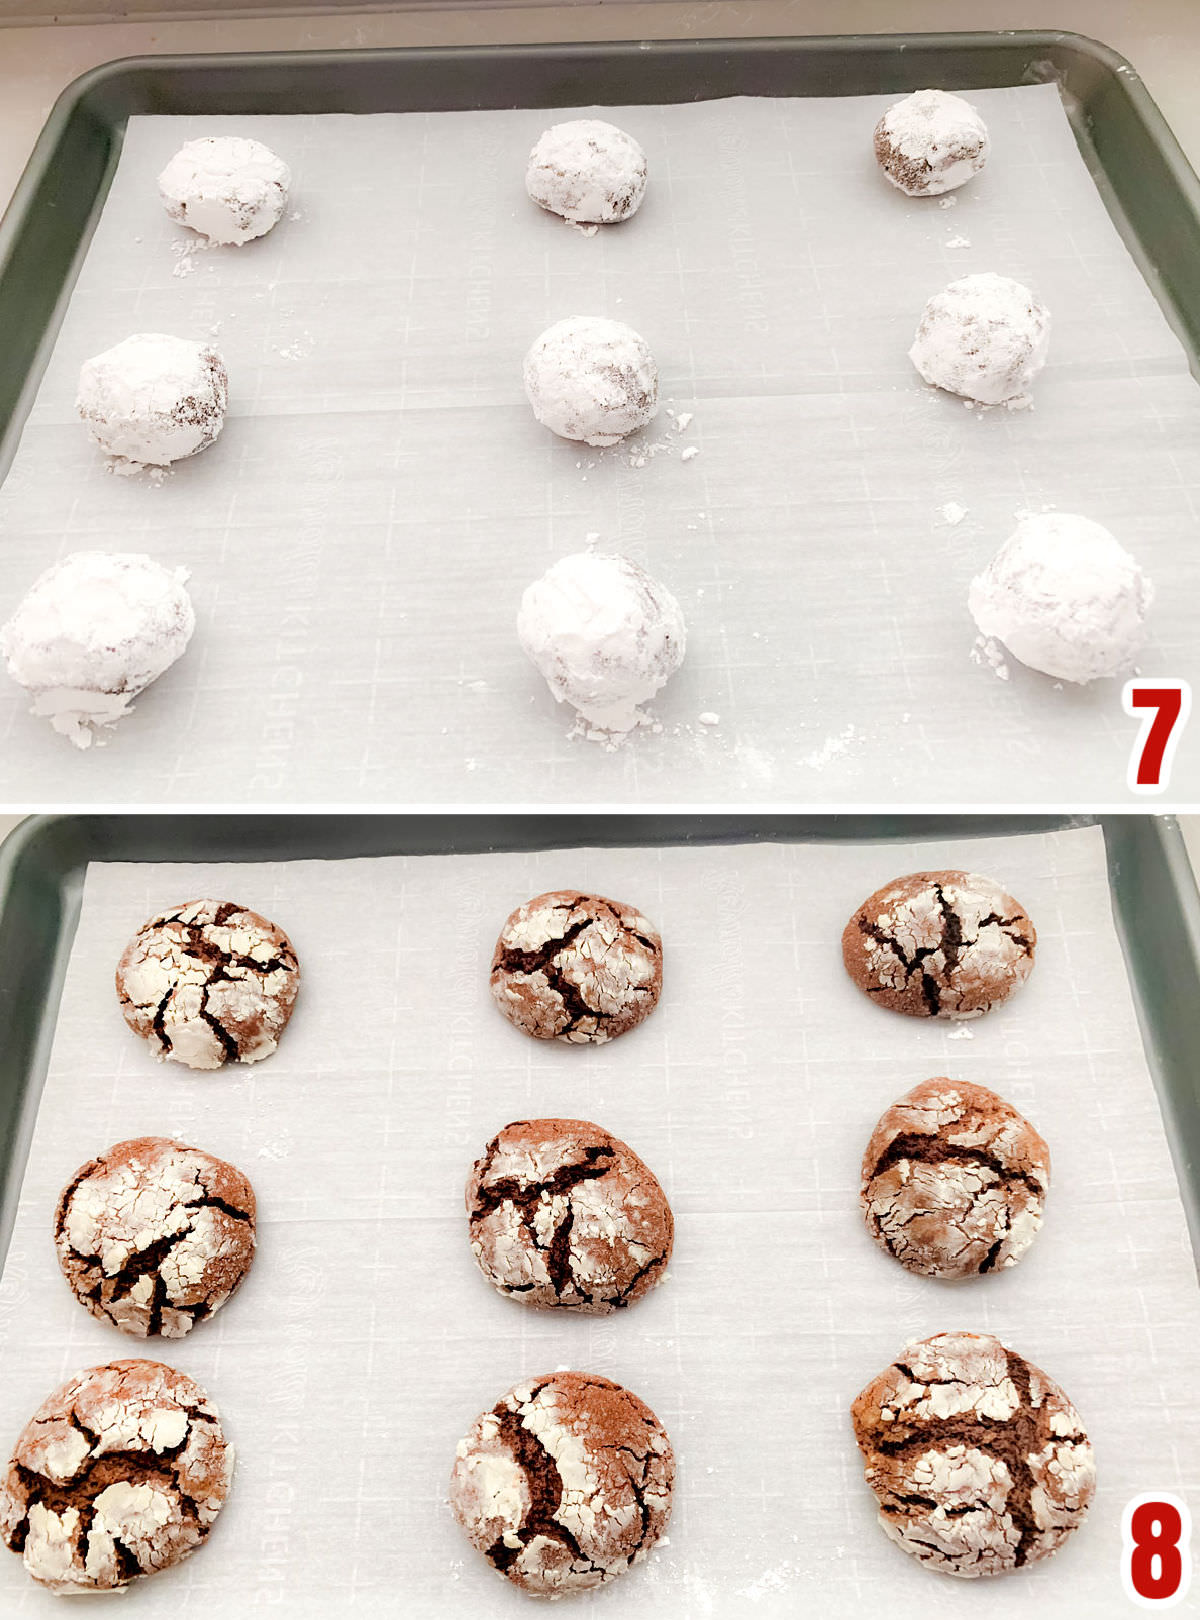 Collage image showing the Crinkle Cookies before they go in the oven and after they come out of the oven.